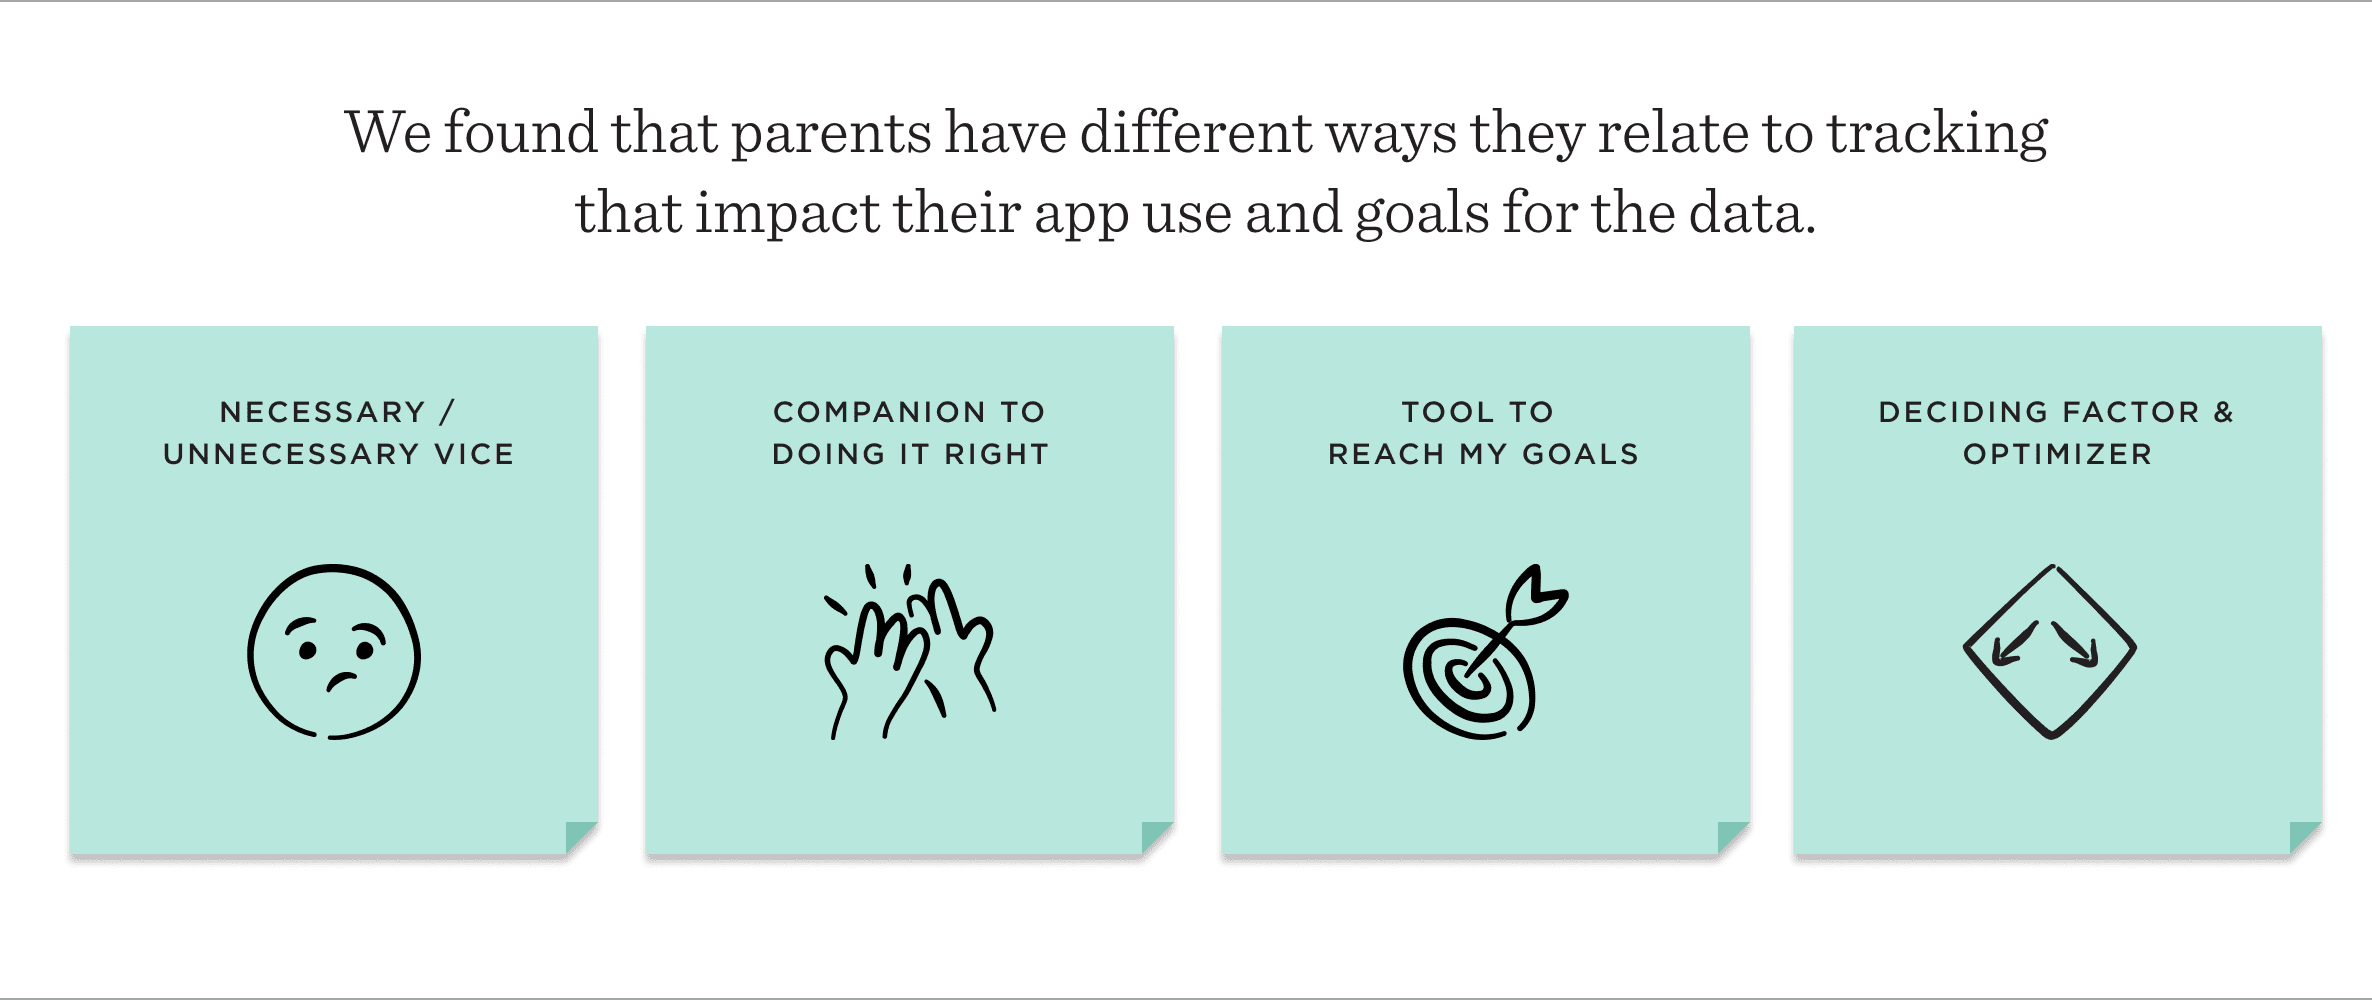 Our research insights focused on 4 ways parents relate to baby data tracking.